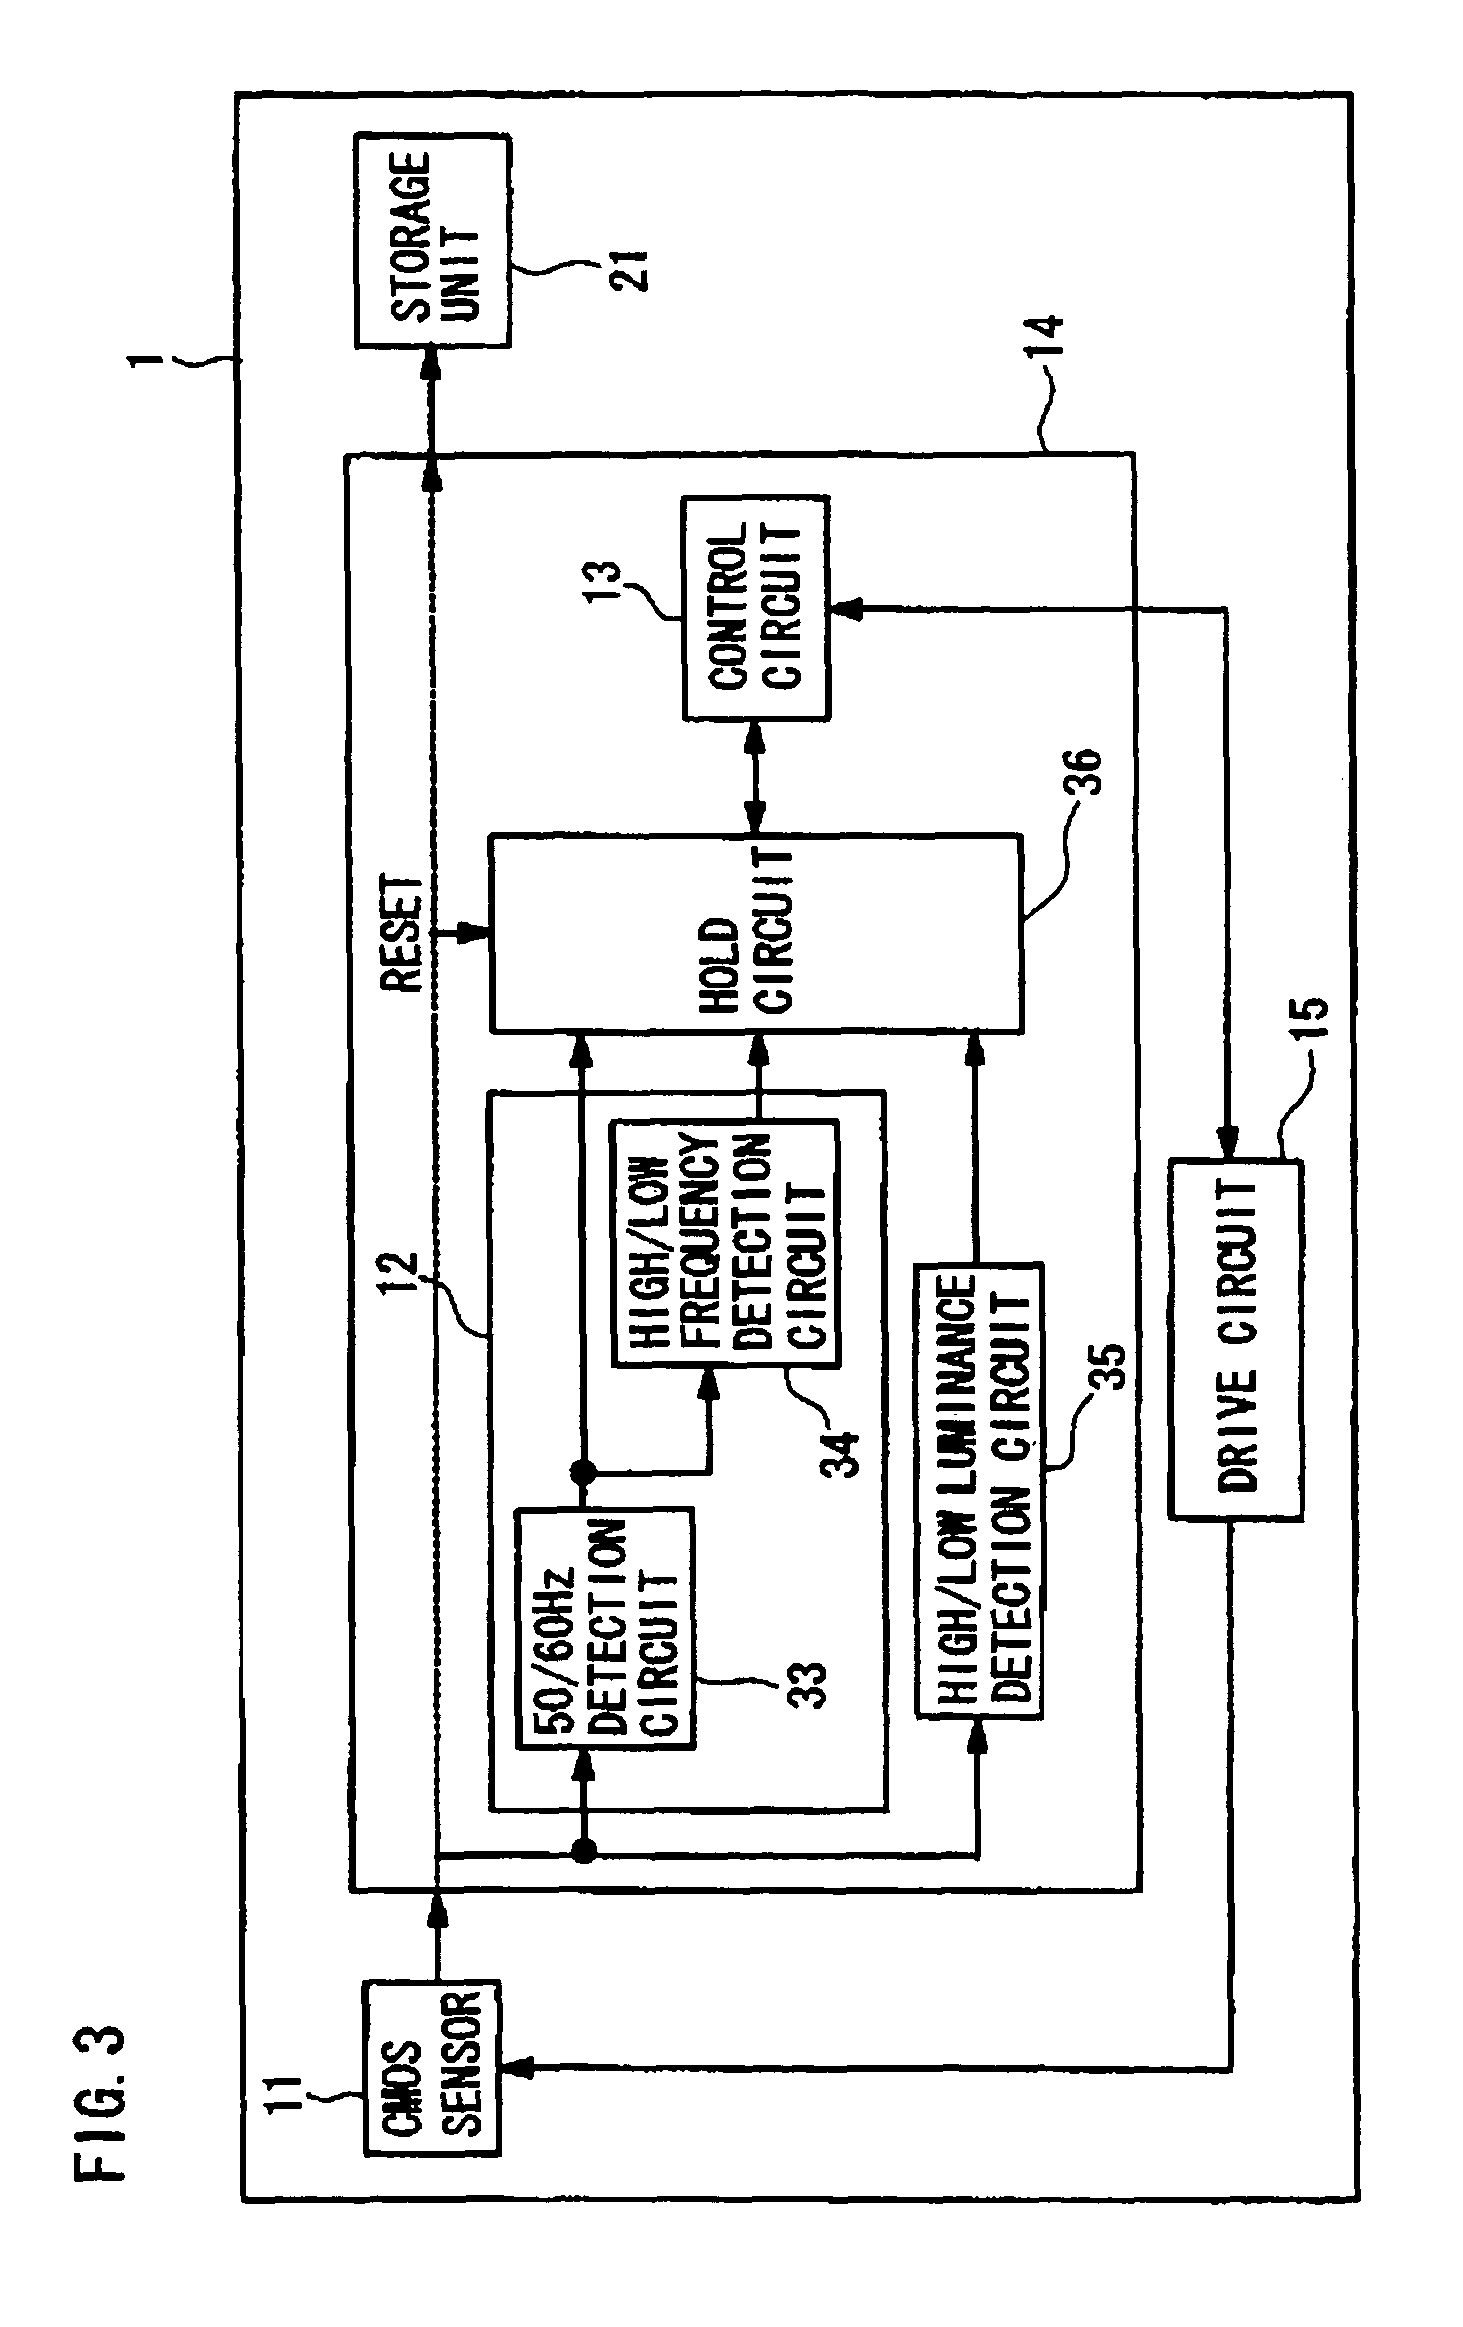 Solid state imaging device for correcting level variations in output signals